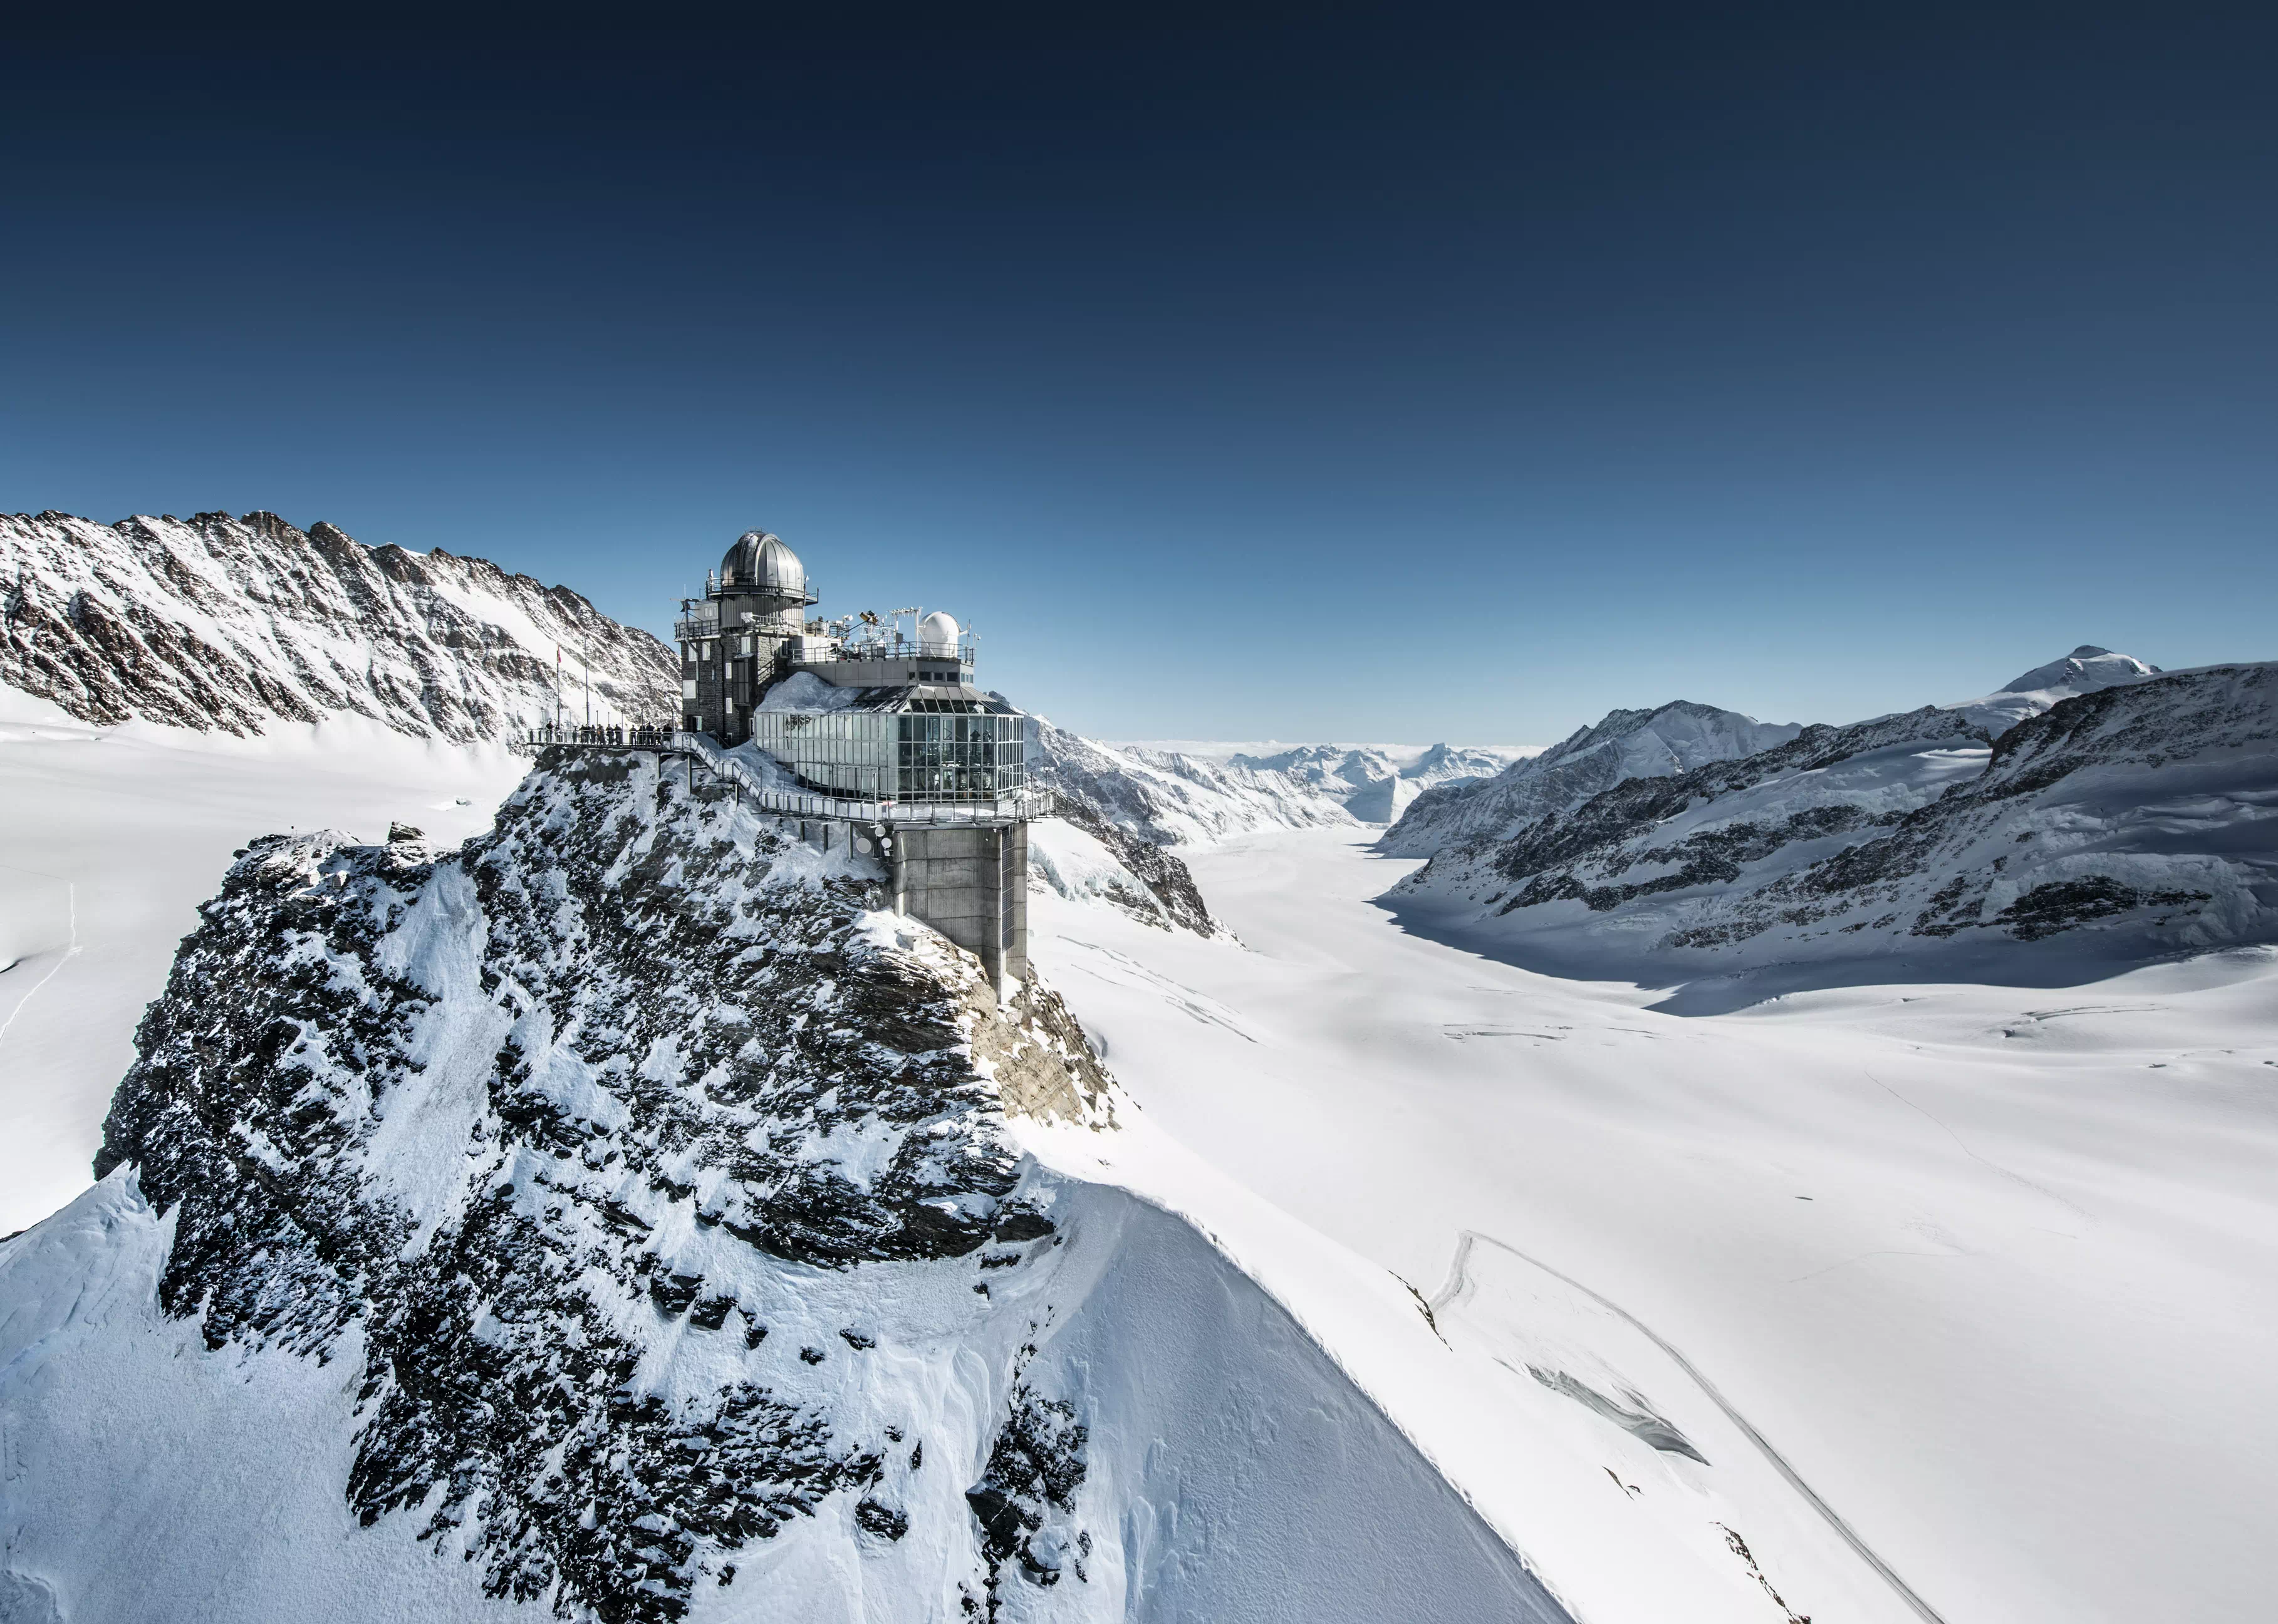 3 Days Trip To THE GRANDEUR OF Jungfraujoch A TOP The Swiss Alps